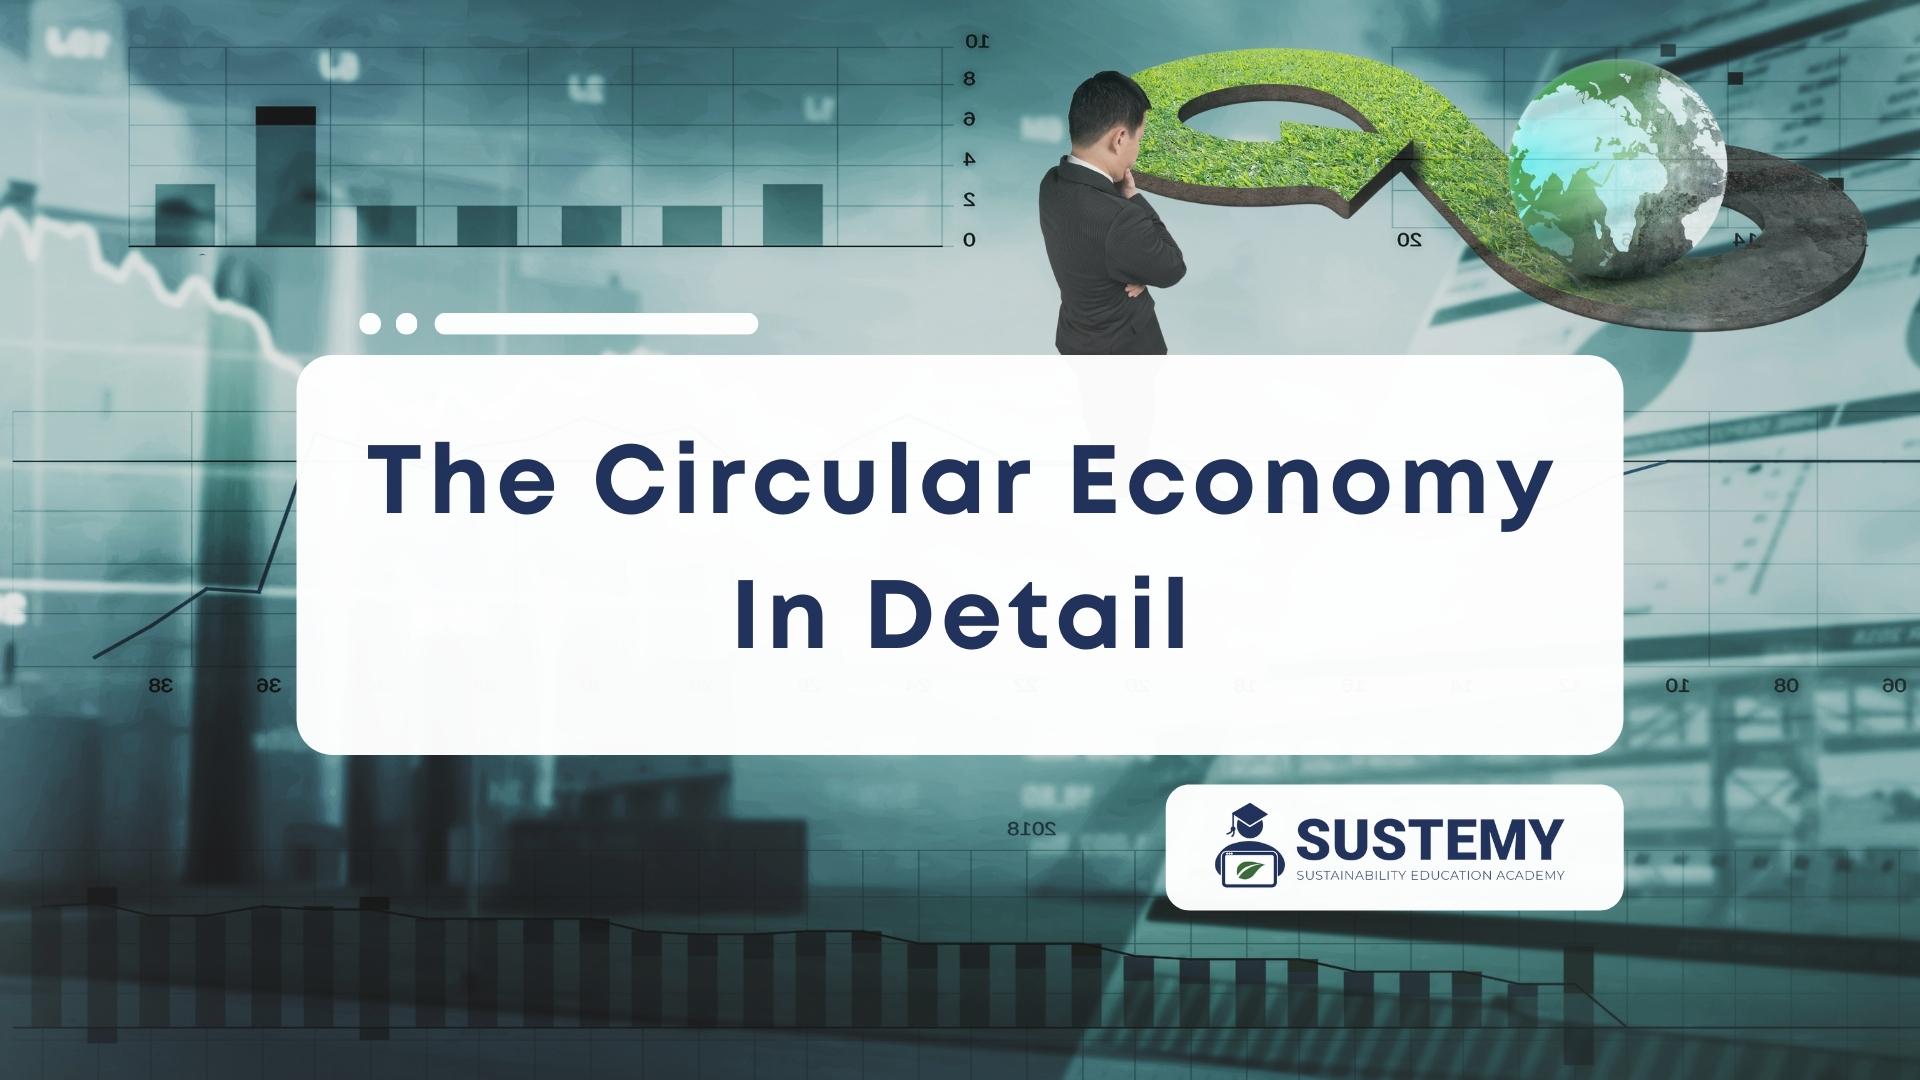 Featured image of the circular economy in detail